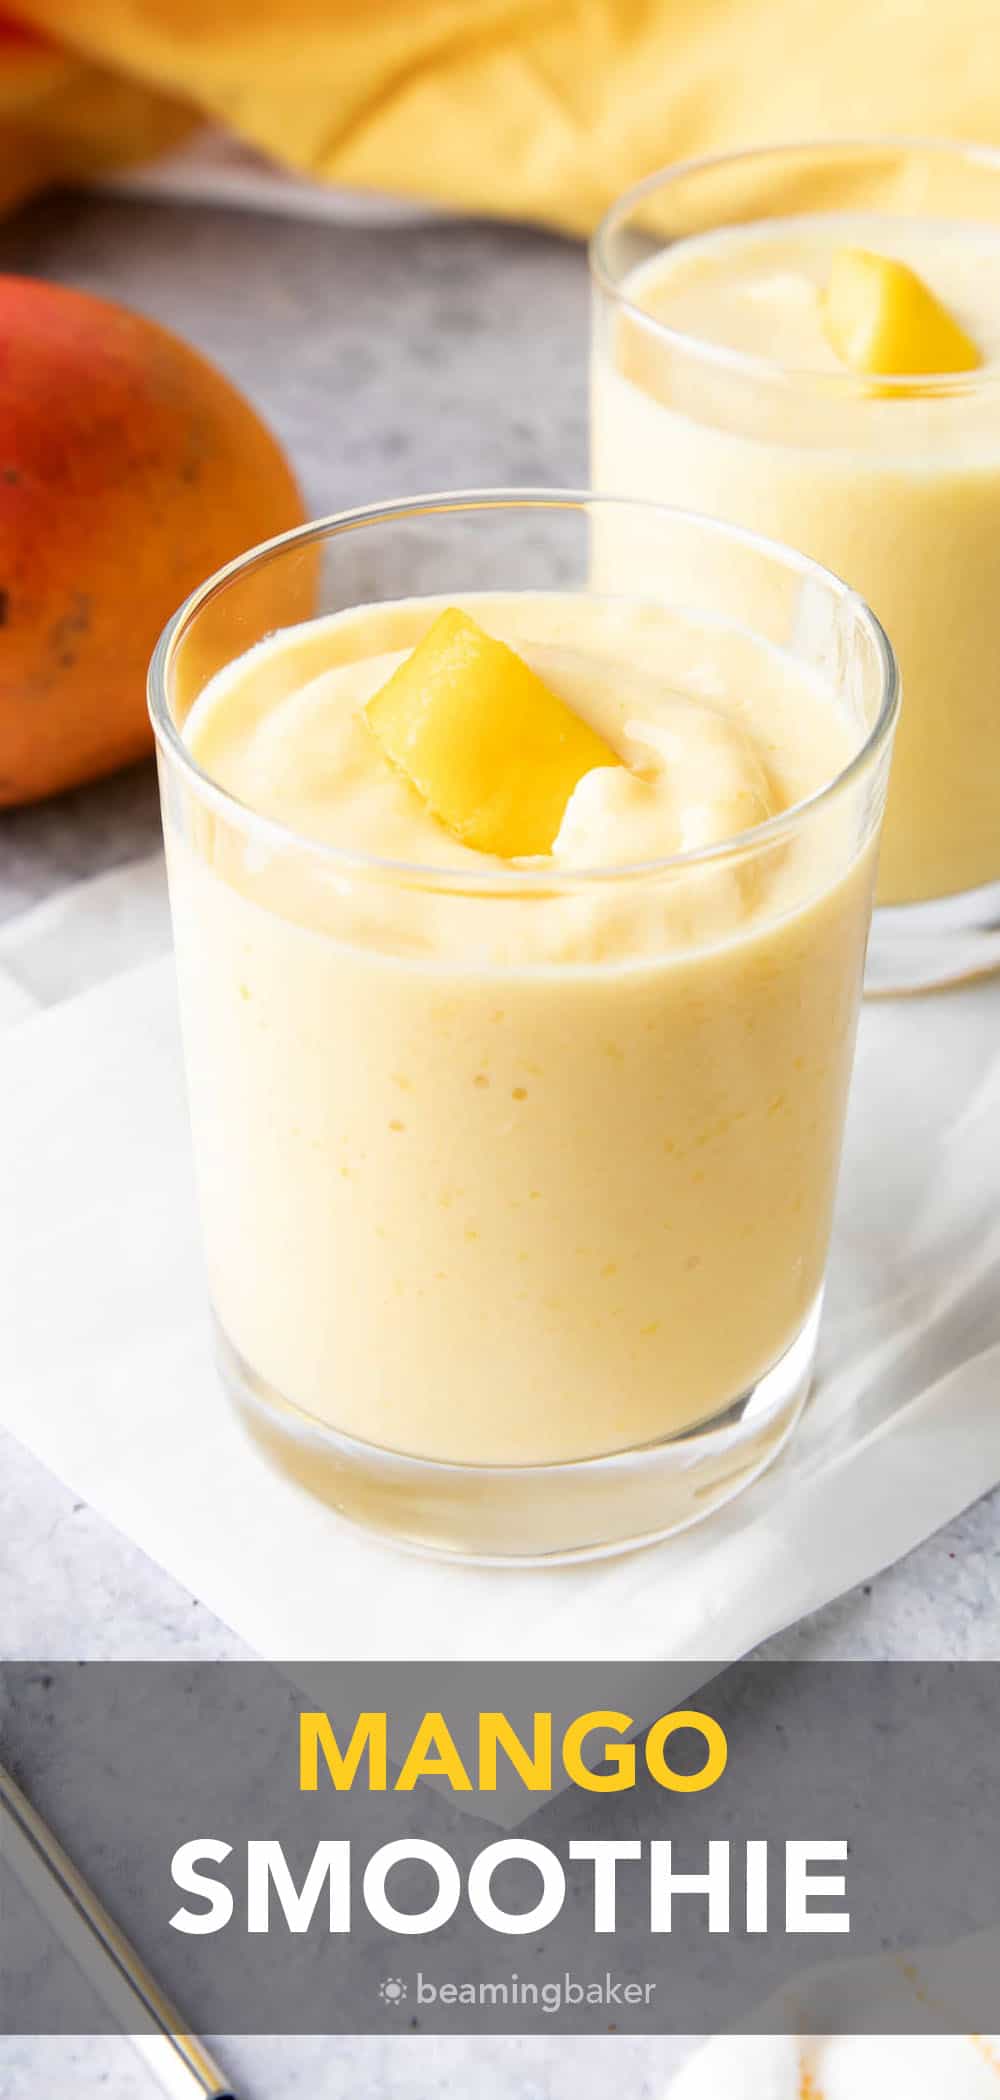 Mango Smoothie: just 3 ingredients for the easiest mango smoothie recipe! Refreshing, creamy and delicious—the best mango smoothie! #Mango #Smoothie #Mangoes #Smoothies | Recipe at BeamingBaker.com